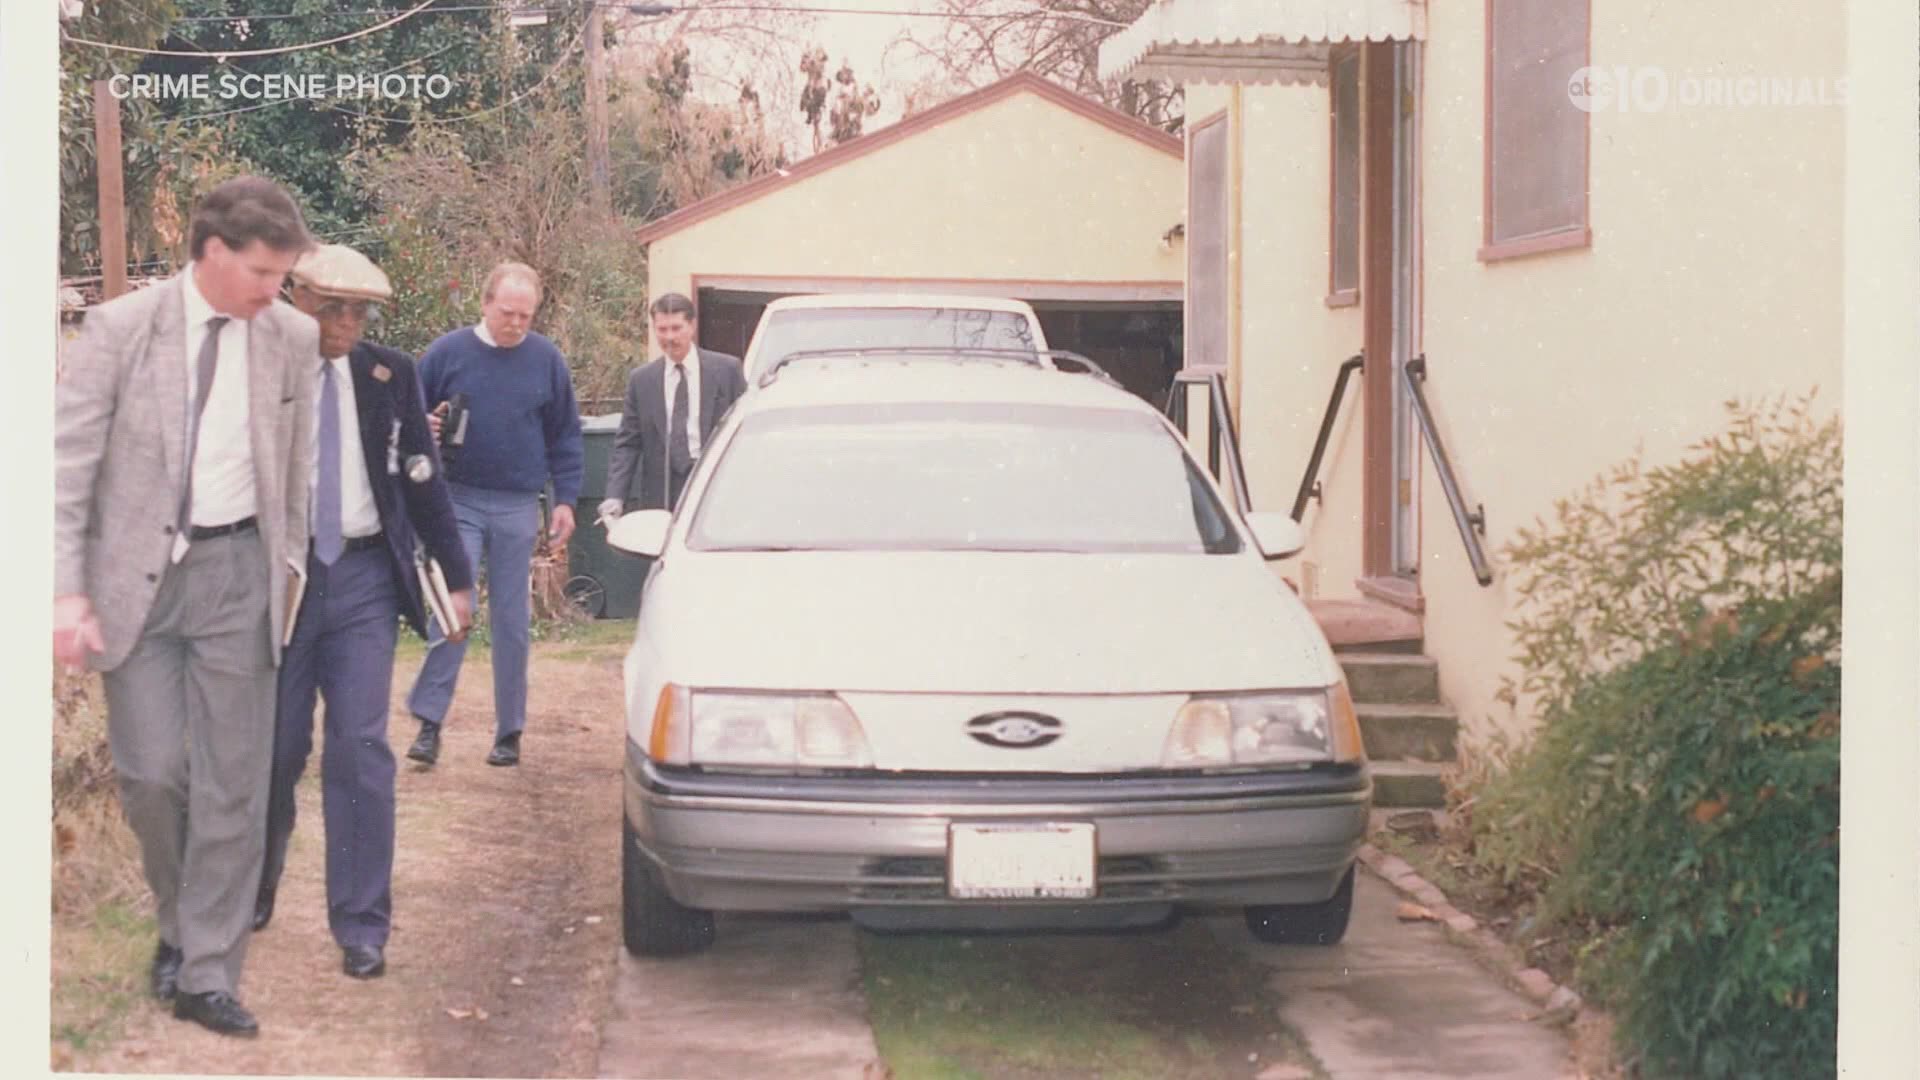 Over 30 years later and Sacramento police are still looking for answers to the question: Who killed this Land Park family?